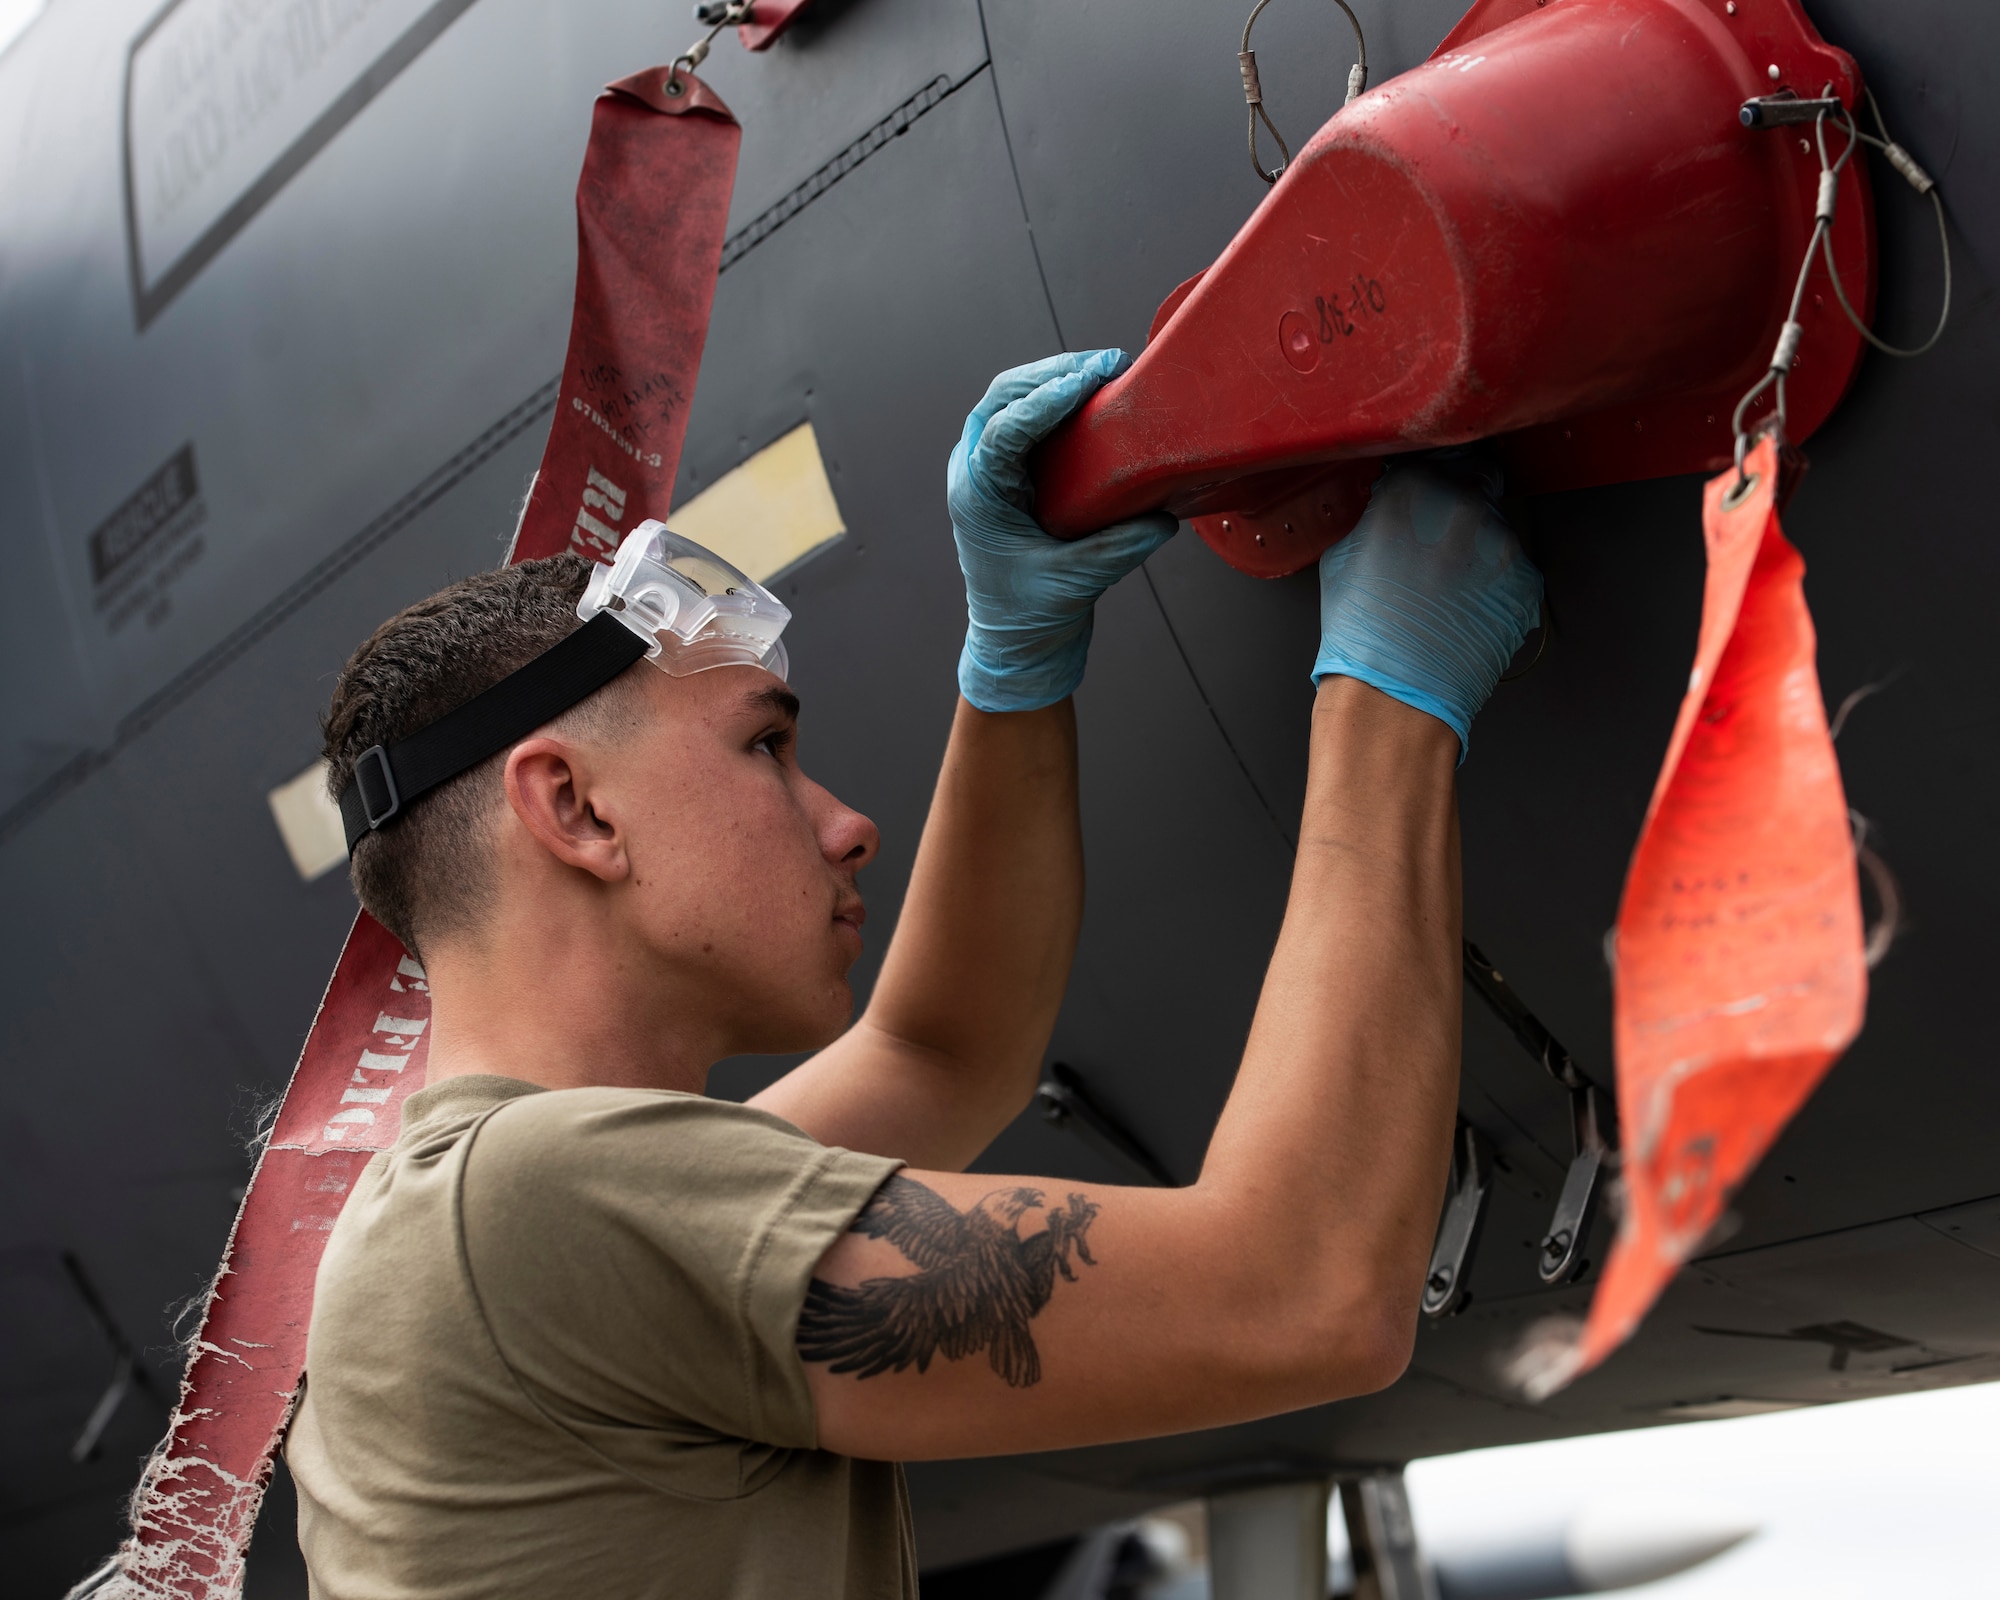 U.S. Air Force Airman 1st Class Wyatt Cresswell, 492nd Aircraft Maintenance Unit crew chief, replaces the covers on an F-15E Strike Eagle at Royal Air Force Lakenheath, England, July 23, 2020. 48th AMXS Airmen ensure Liberty Wing F-15s are fit to fly and can continue to provide superior airpower capabilities when called upon. (U.S. Air Force photo by Airman 1st Class Jessi Monte)